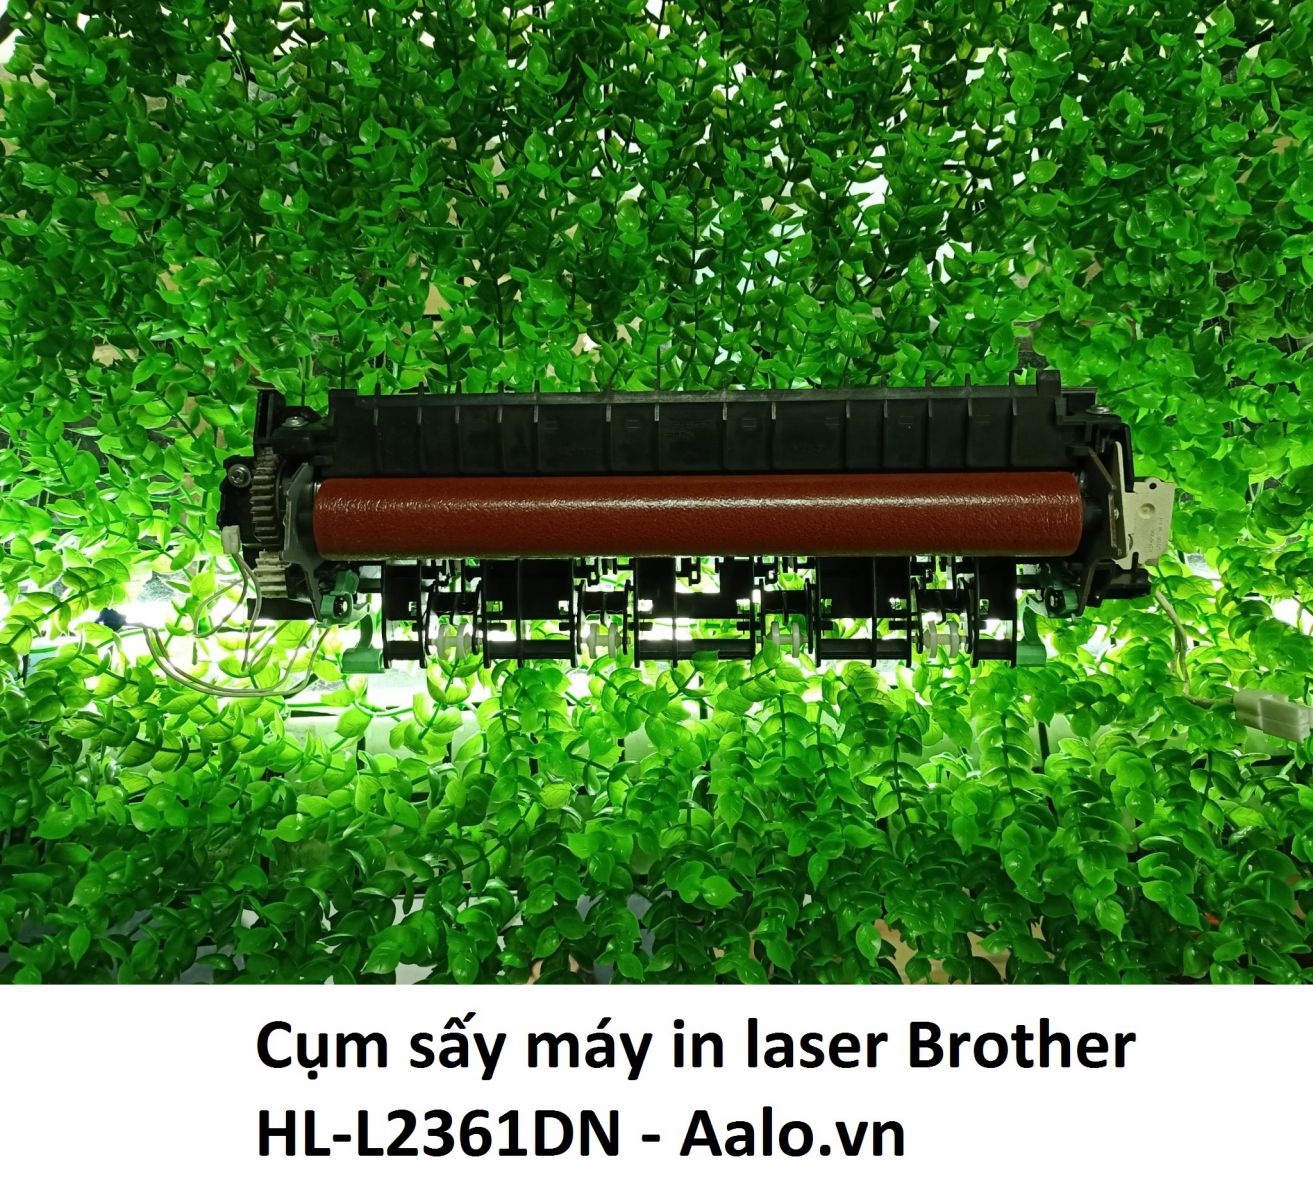 Cụm sấy máy in laser Brother HL-L2361DN - Aalo.vn